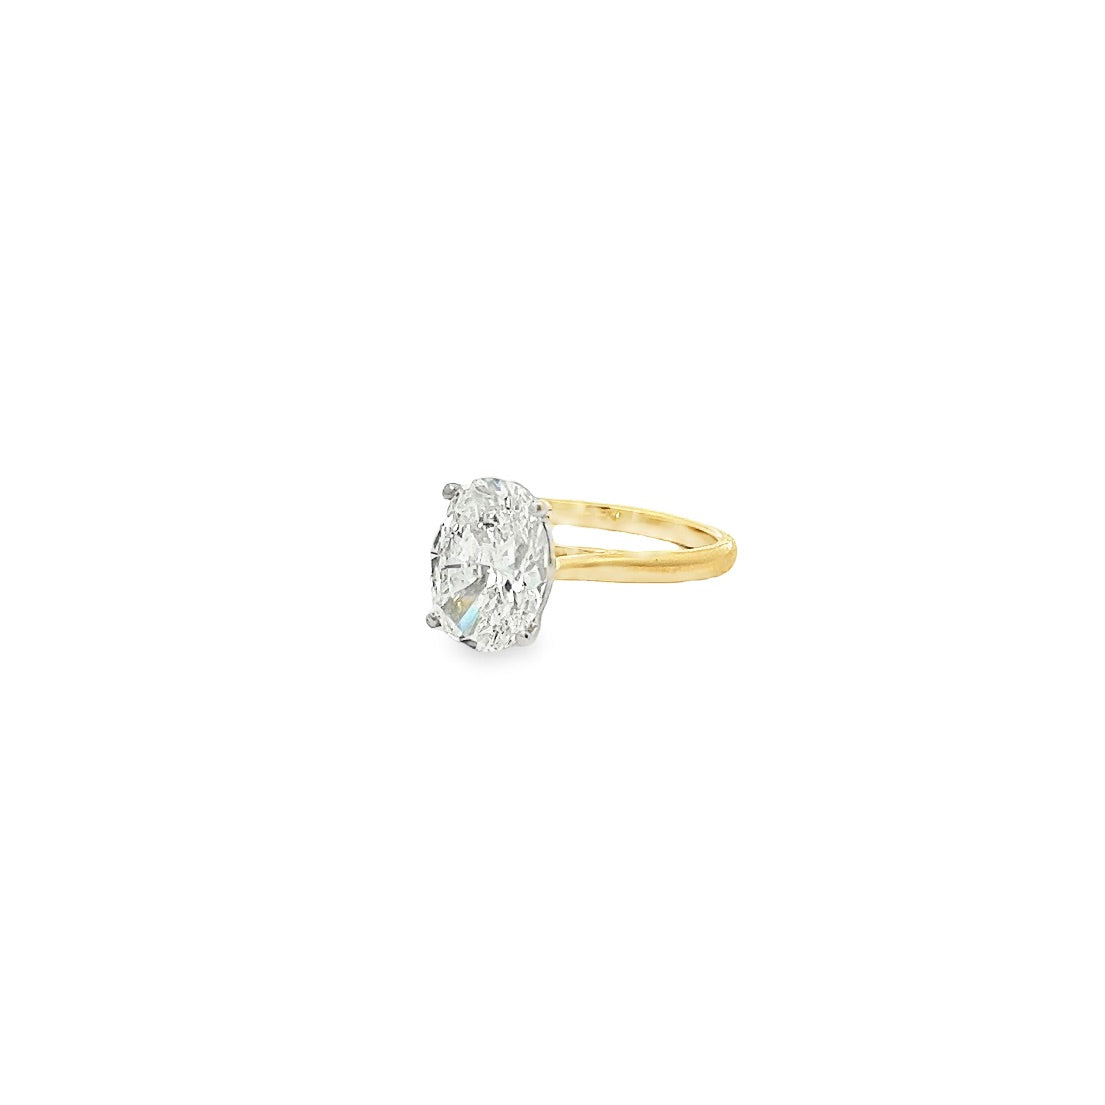 The Davenport 18K Yellow Gold Oval Engagement Ring